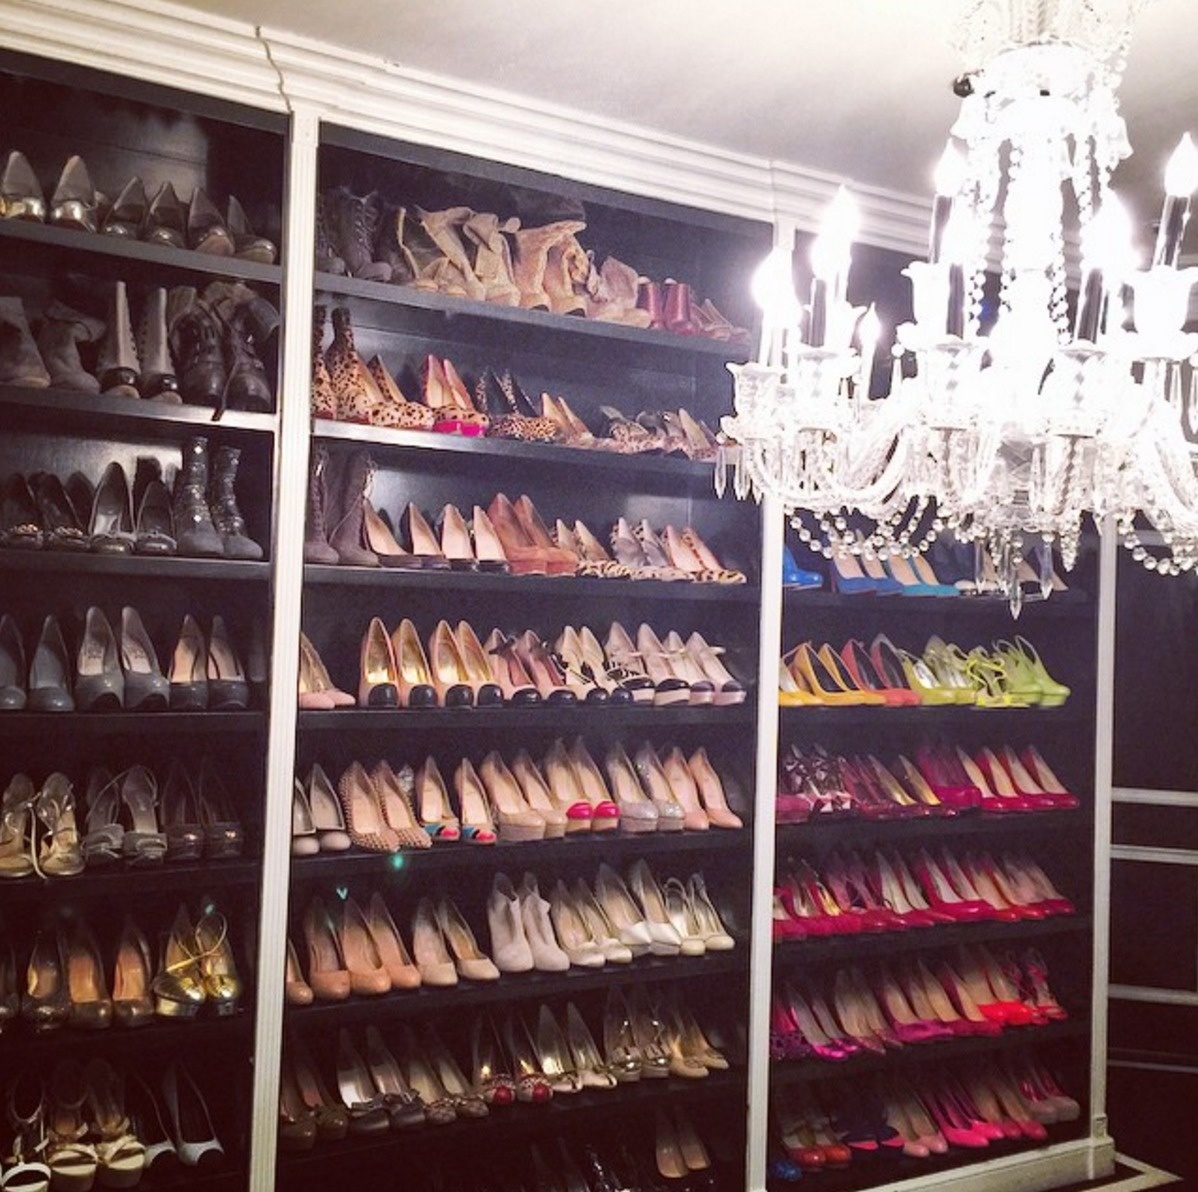 Finally, Paris Hilton's closet has exactly as many shoes as you would have guessed.